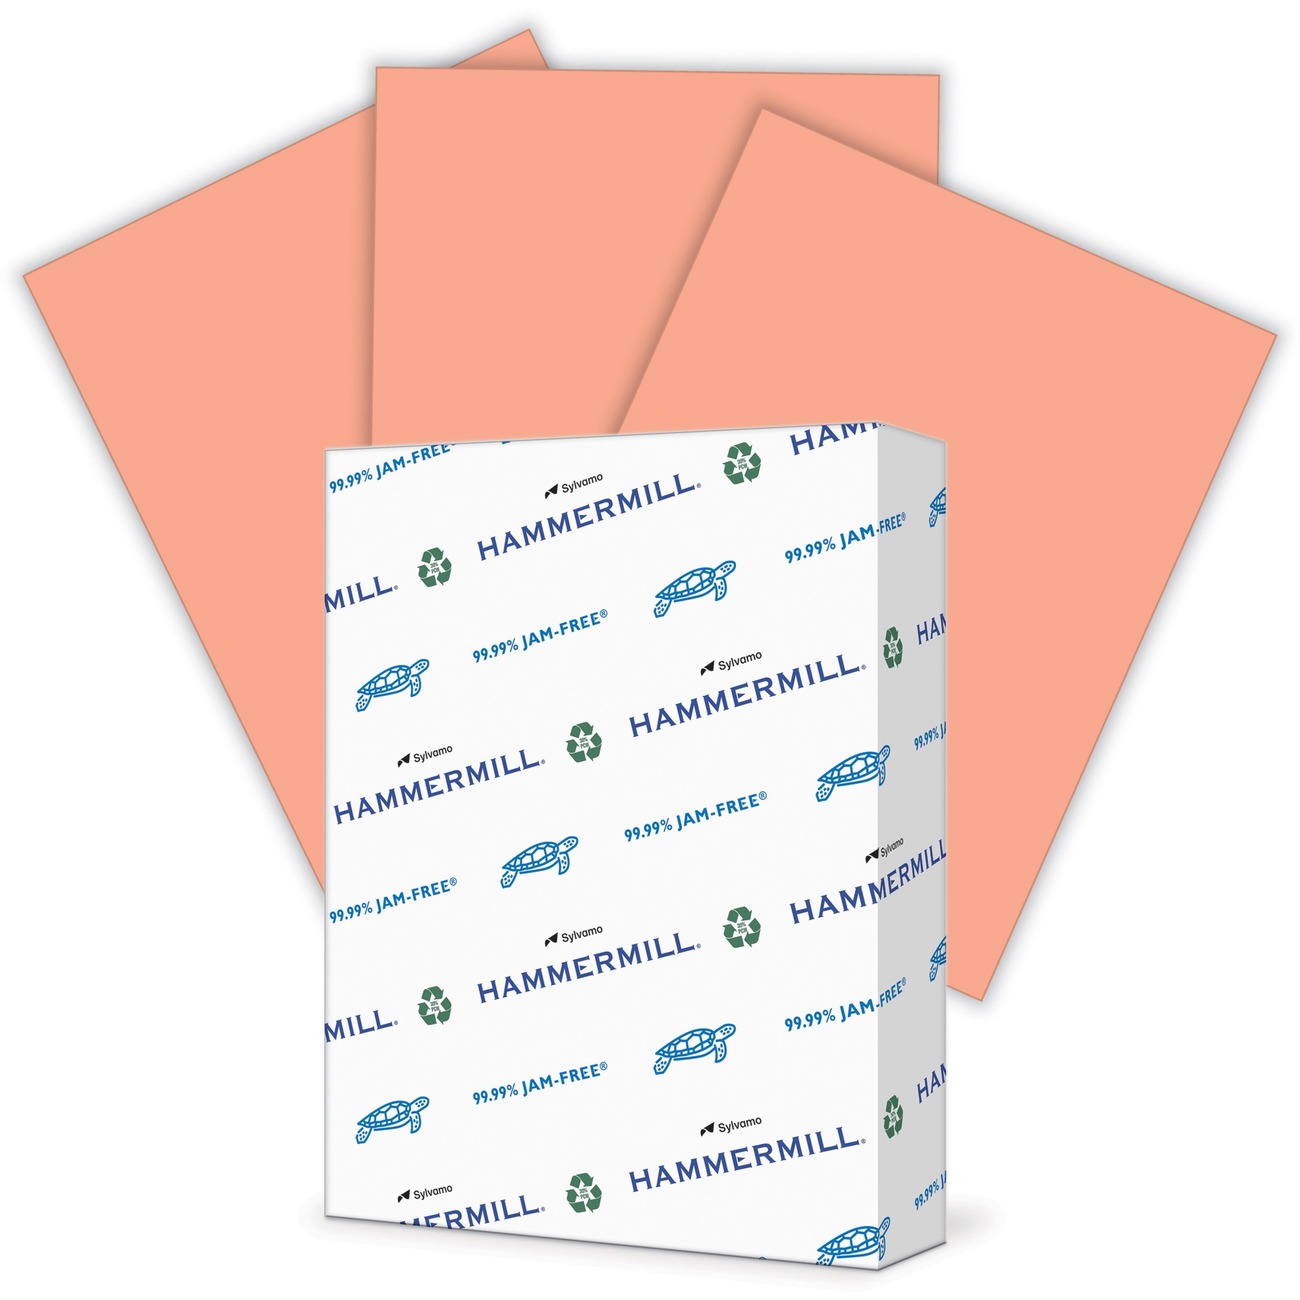 Hammermill Printer Paper, Bulk Business Value Pack - Includes Pallet of  Copy Paper and 1 Case of Digital Color Copy Paper